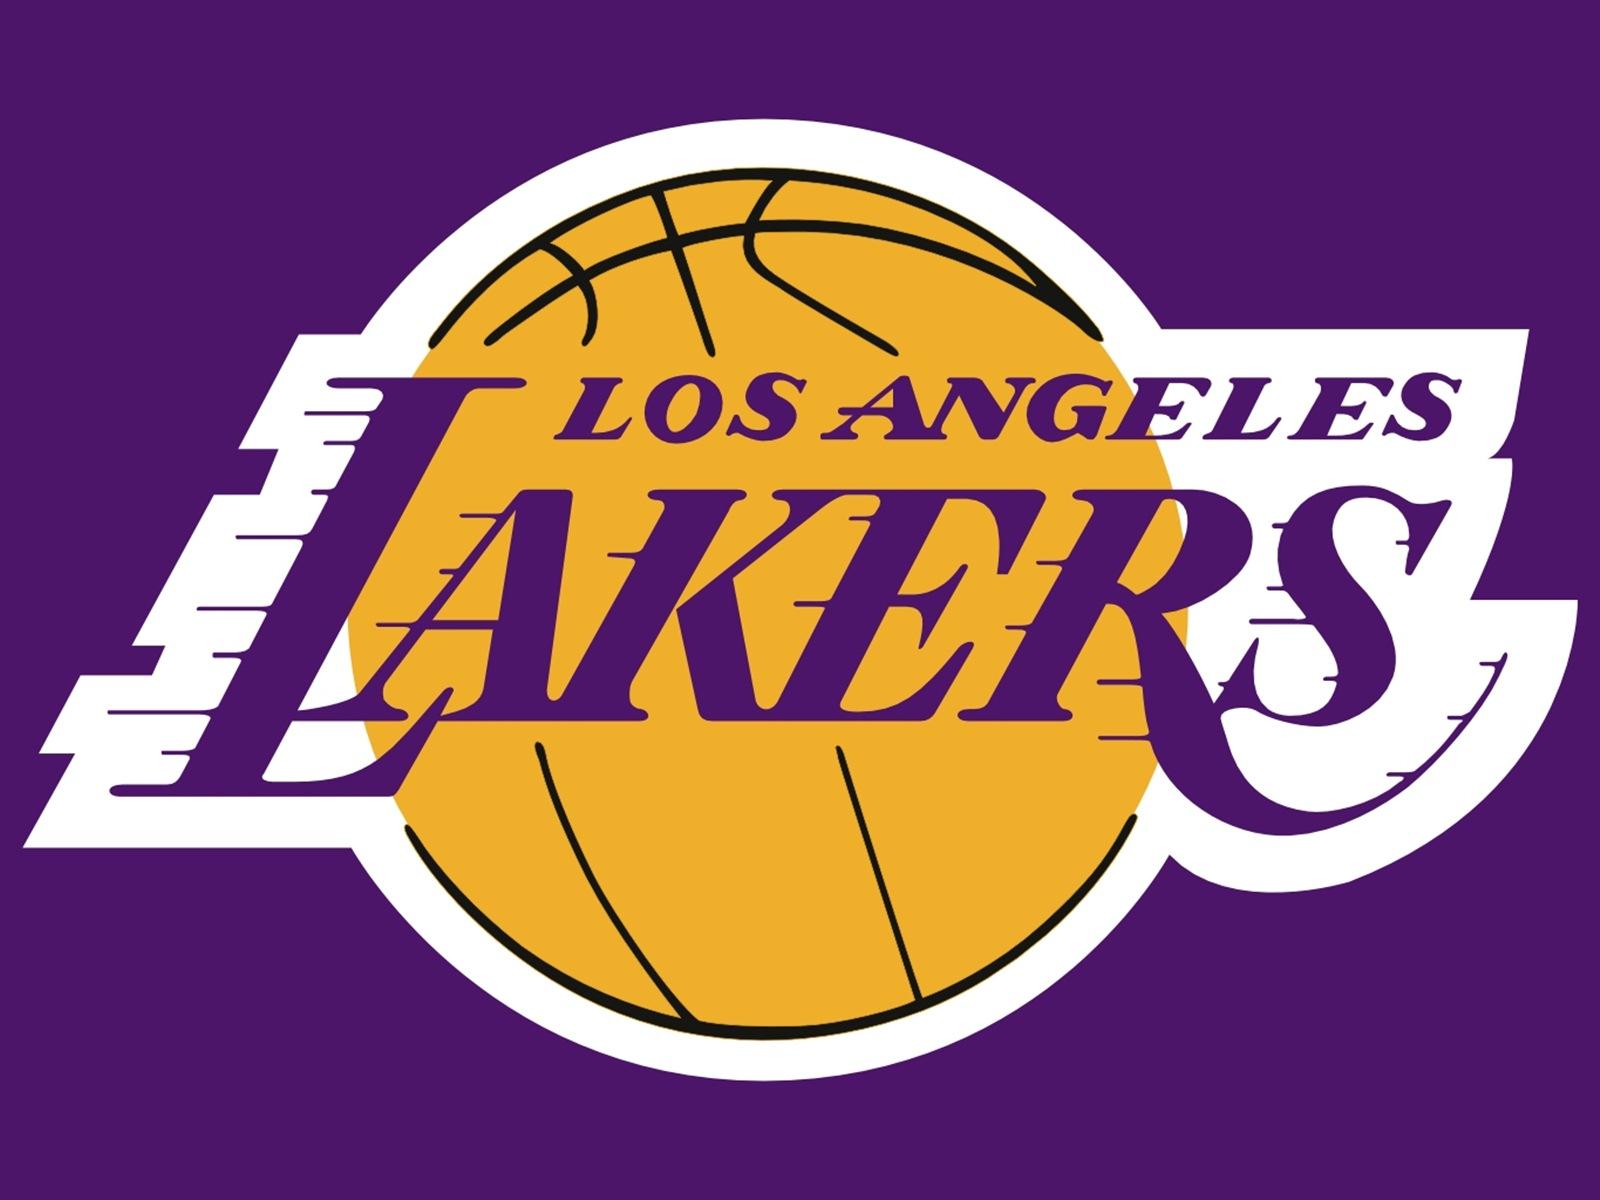 Los Angeles Lakers Logo - The Los Angeles Lakers logo without eyebrows